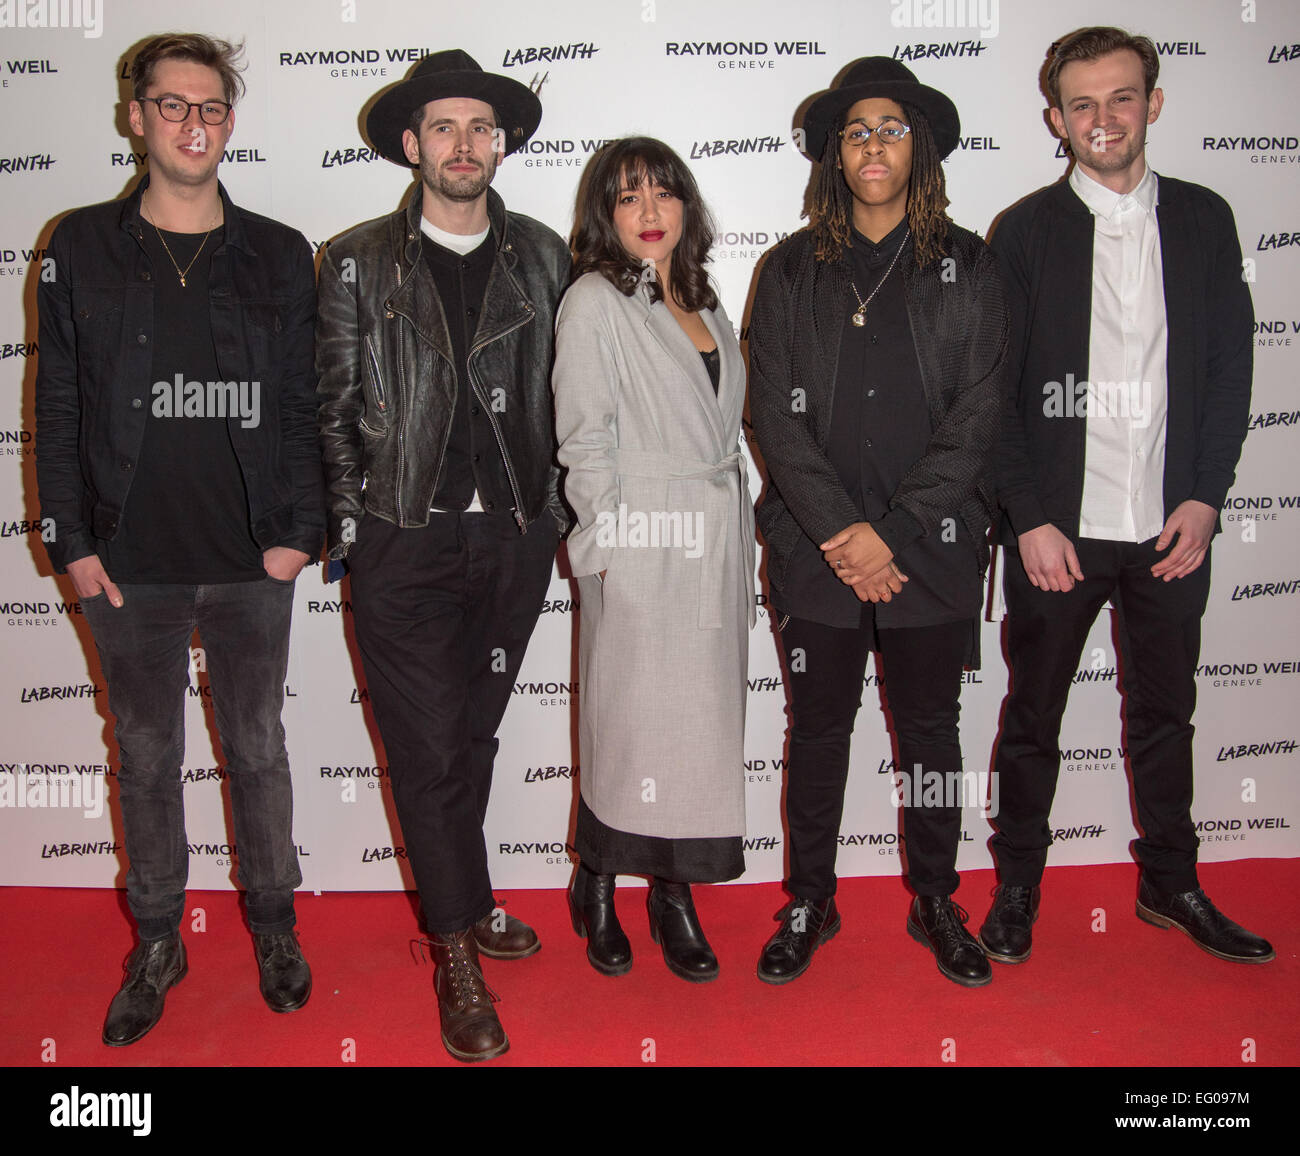 London, UK. 12th February, 2015. Clean Banditt attend as Labrinth hosts Raymond Weil Pre-BRIT Awards dinner at The Mosaica on February 12, 2015 in London. Credit:  See Li/Alamy Live News Stock Photo